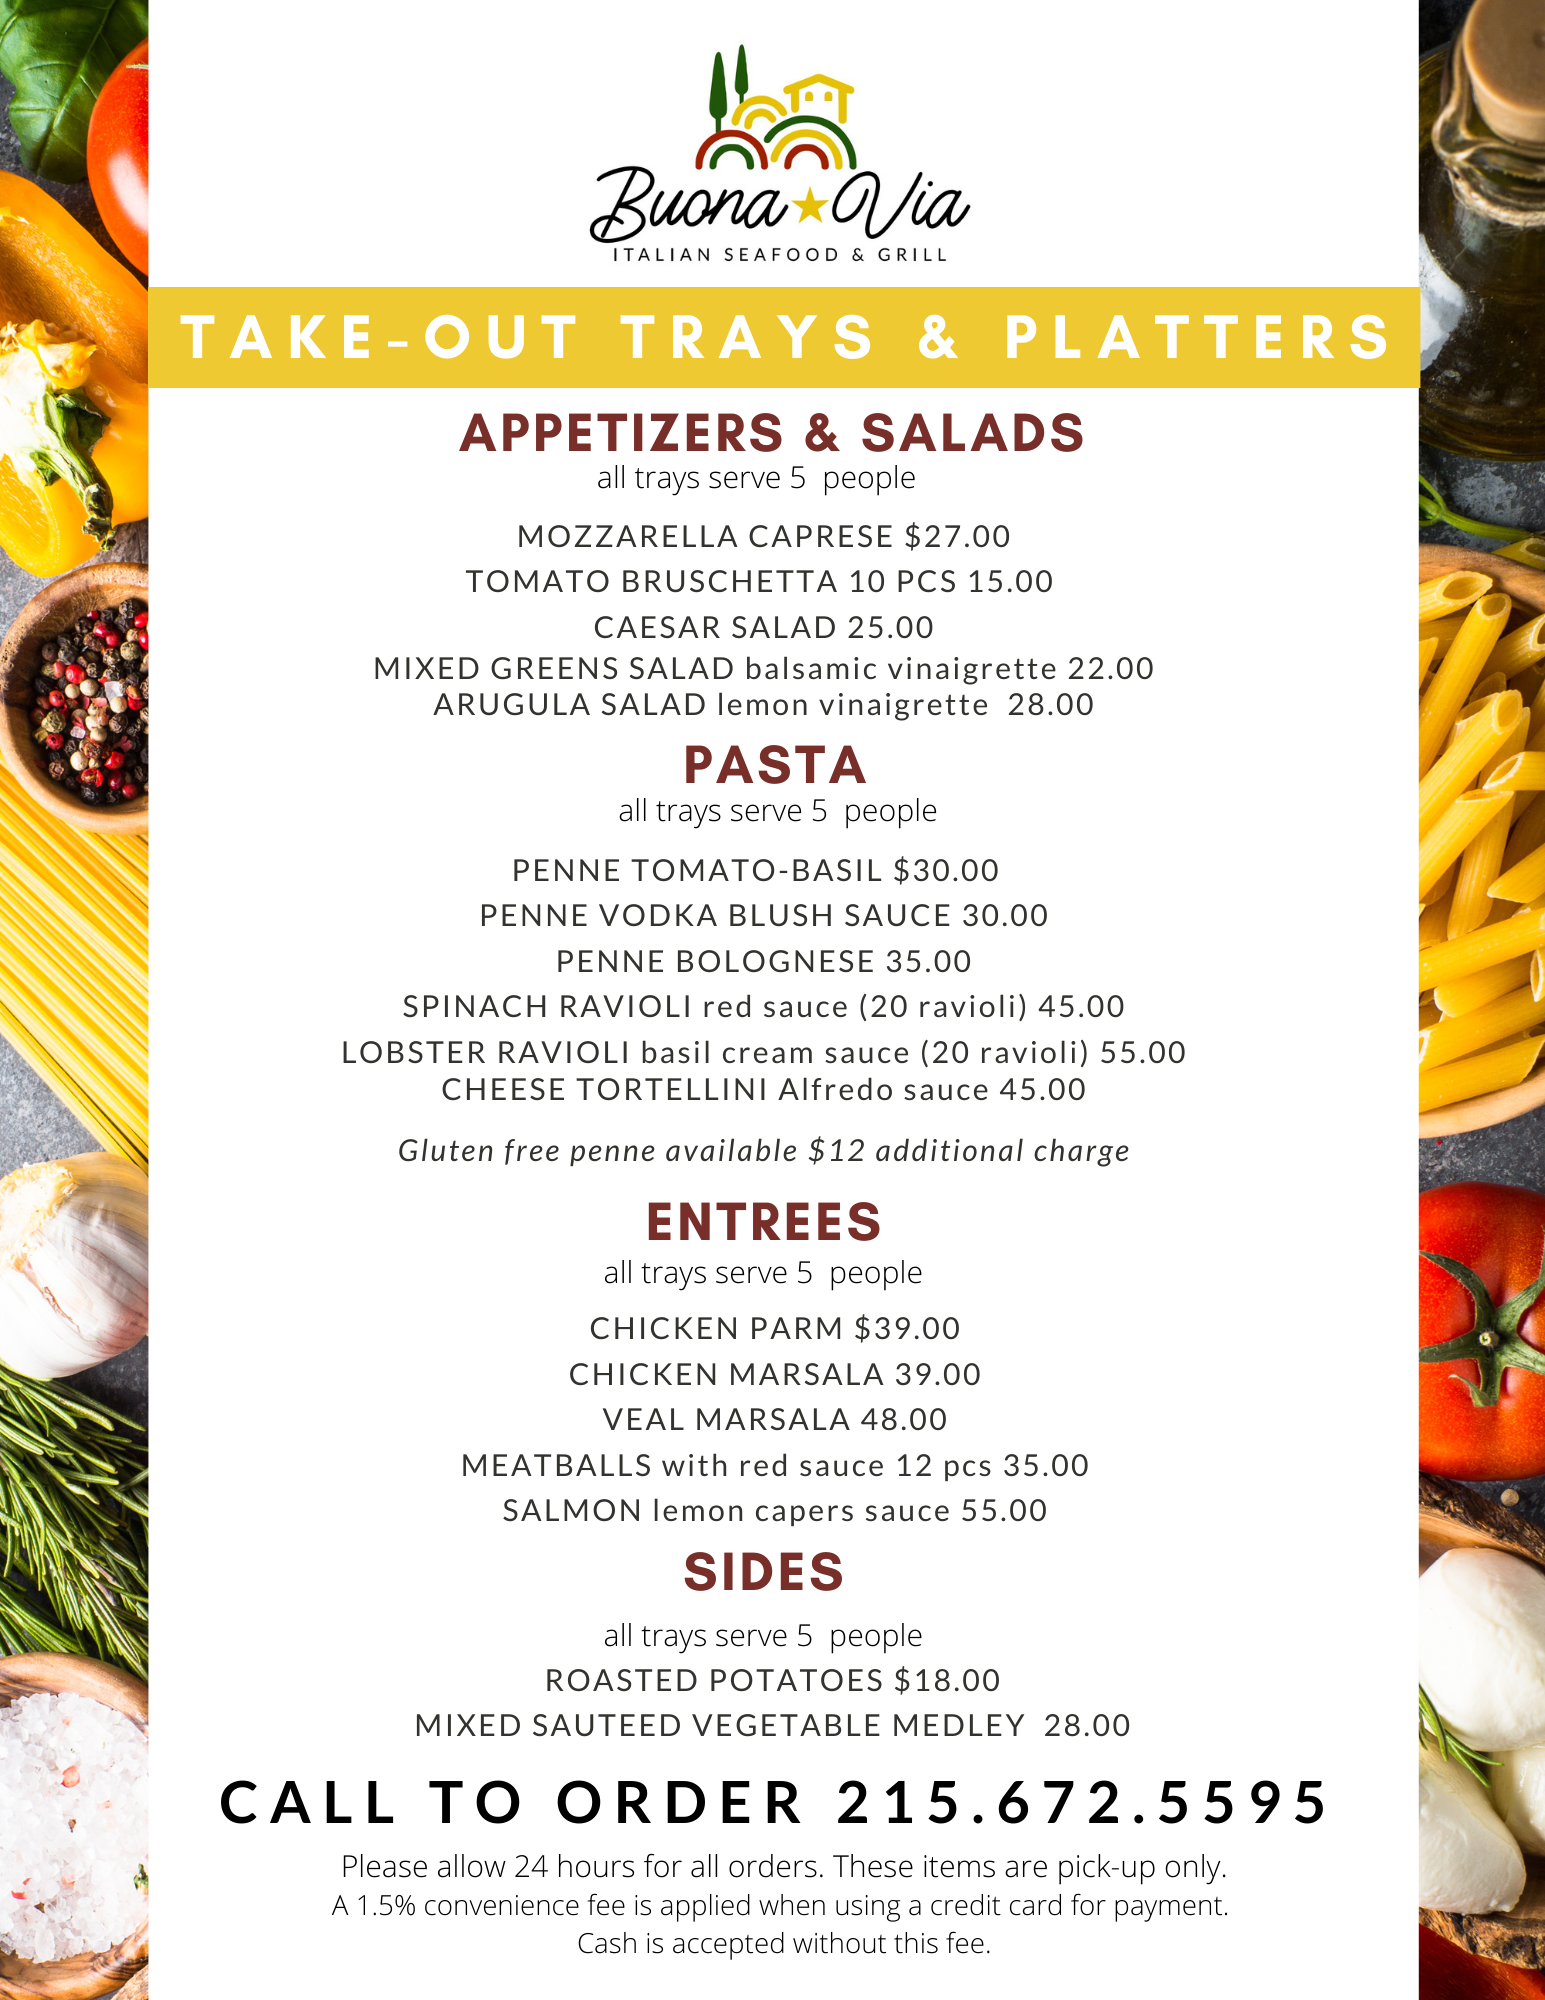 A menu for take out trays and platters.